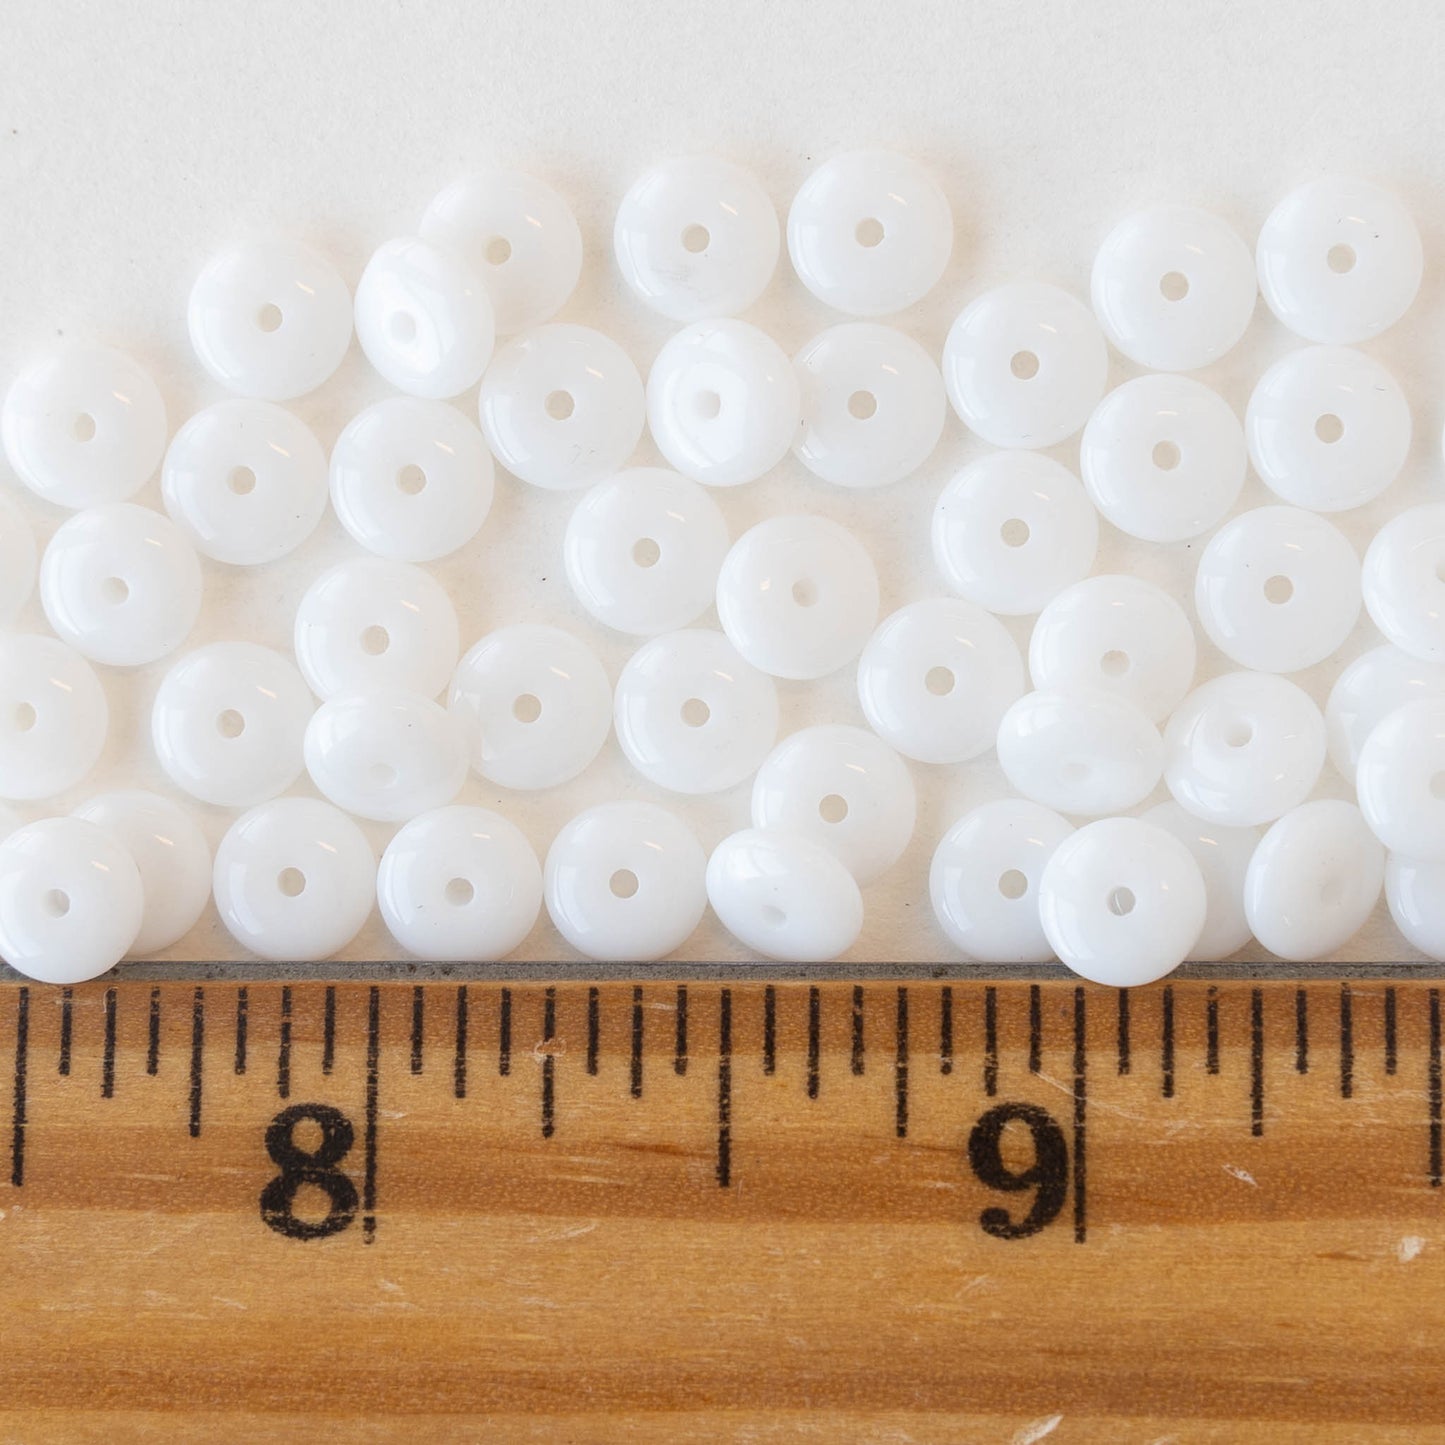 6mm Glass Rondelle Beads - Opaque White  - 100 Beads